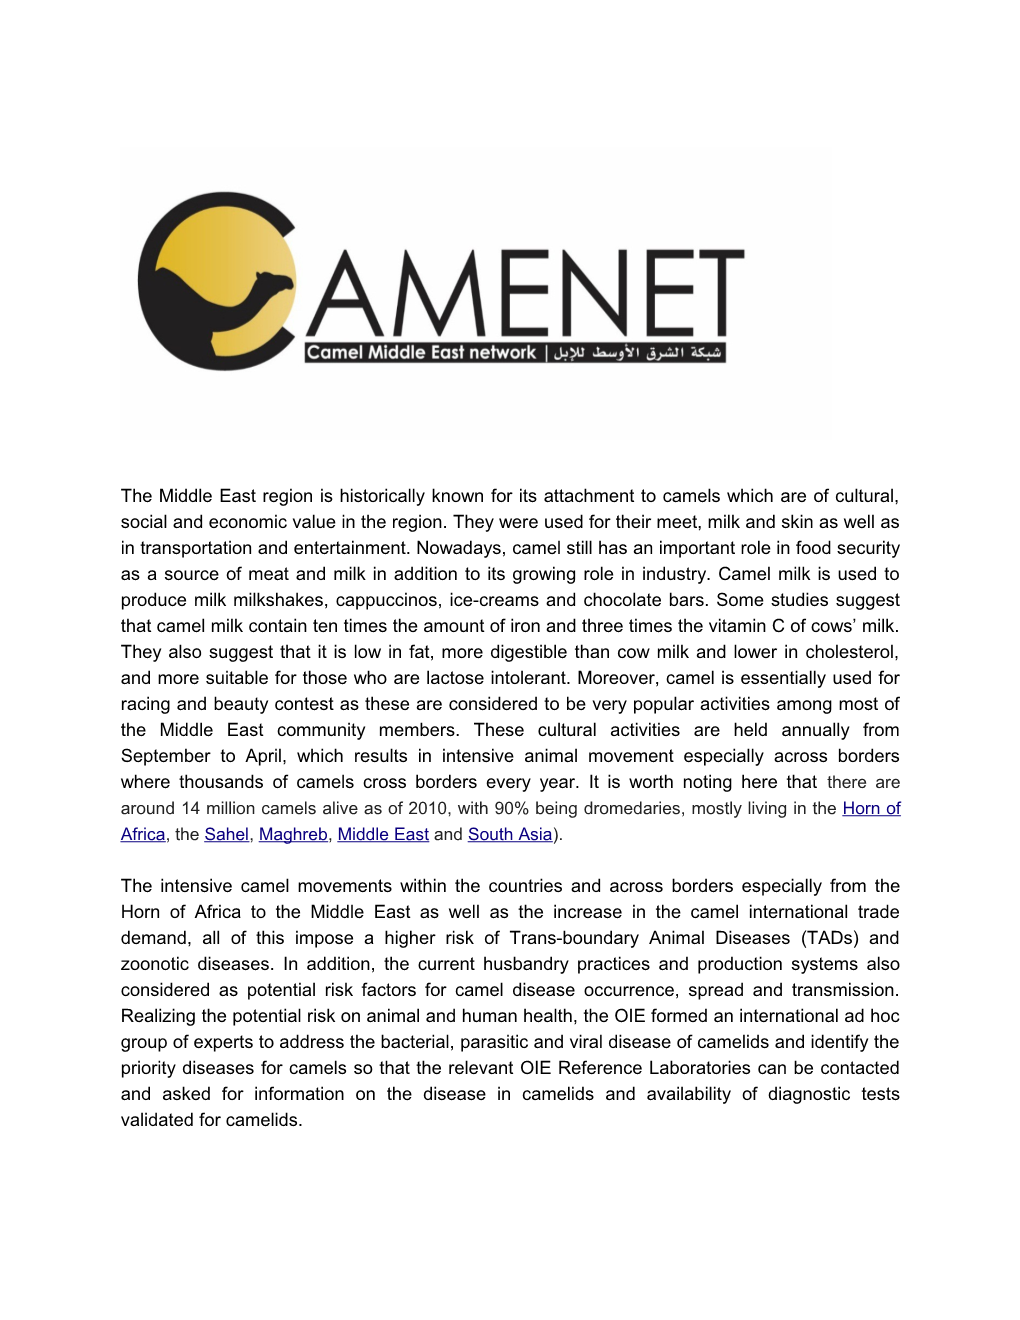 The Objectives of CAMENET